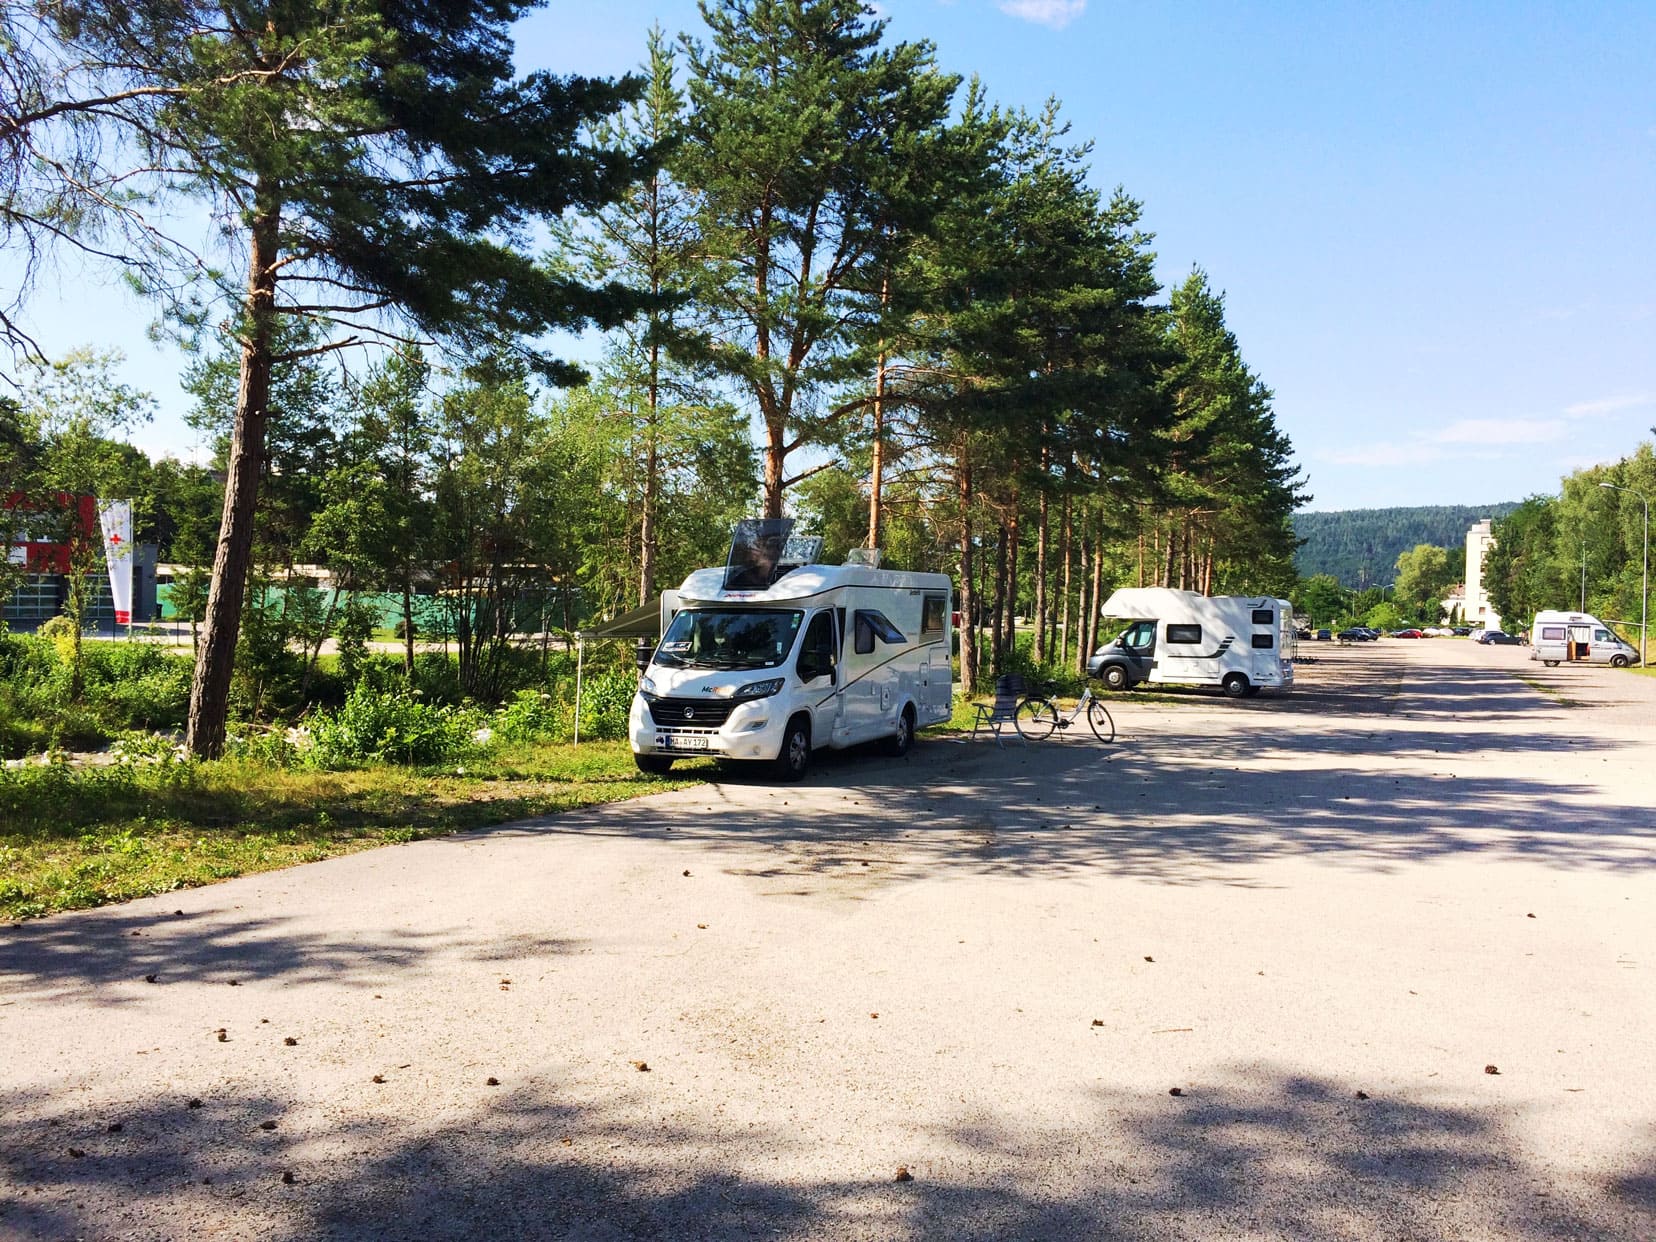 Motorhome parked in large carpark with shady trees